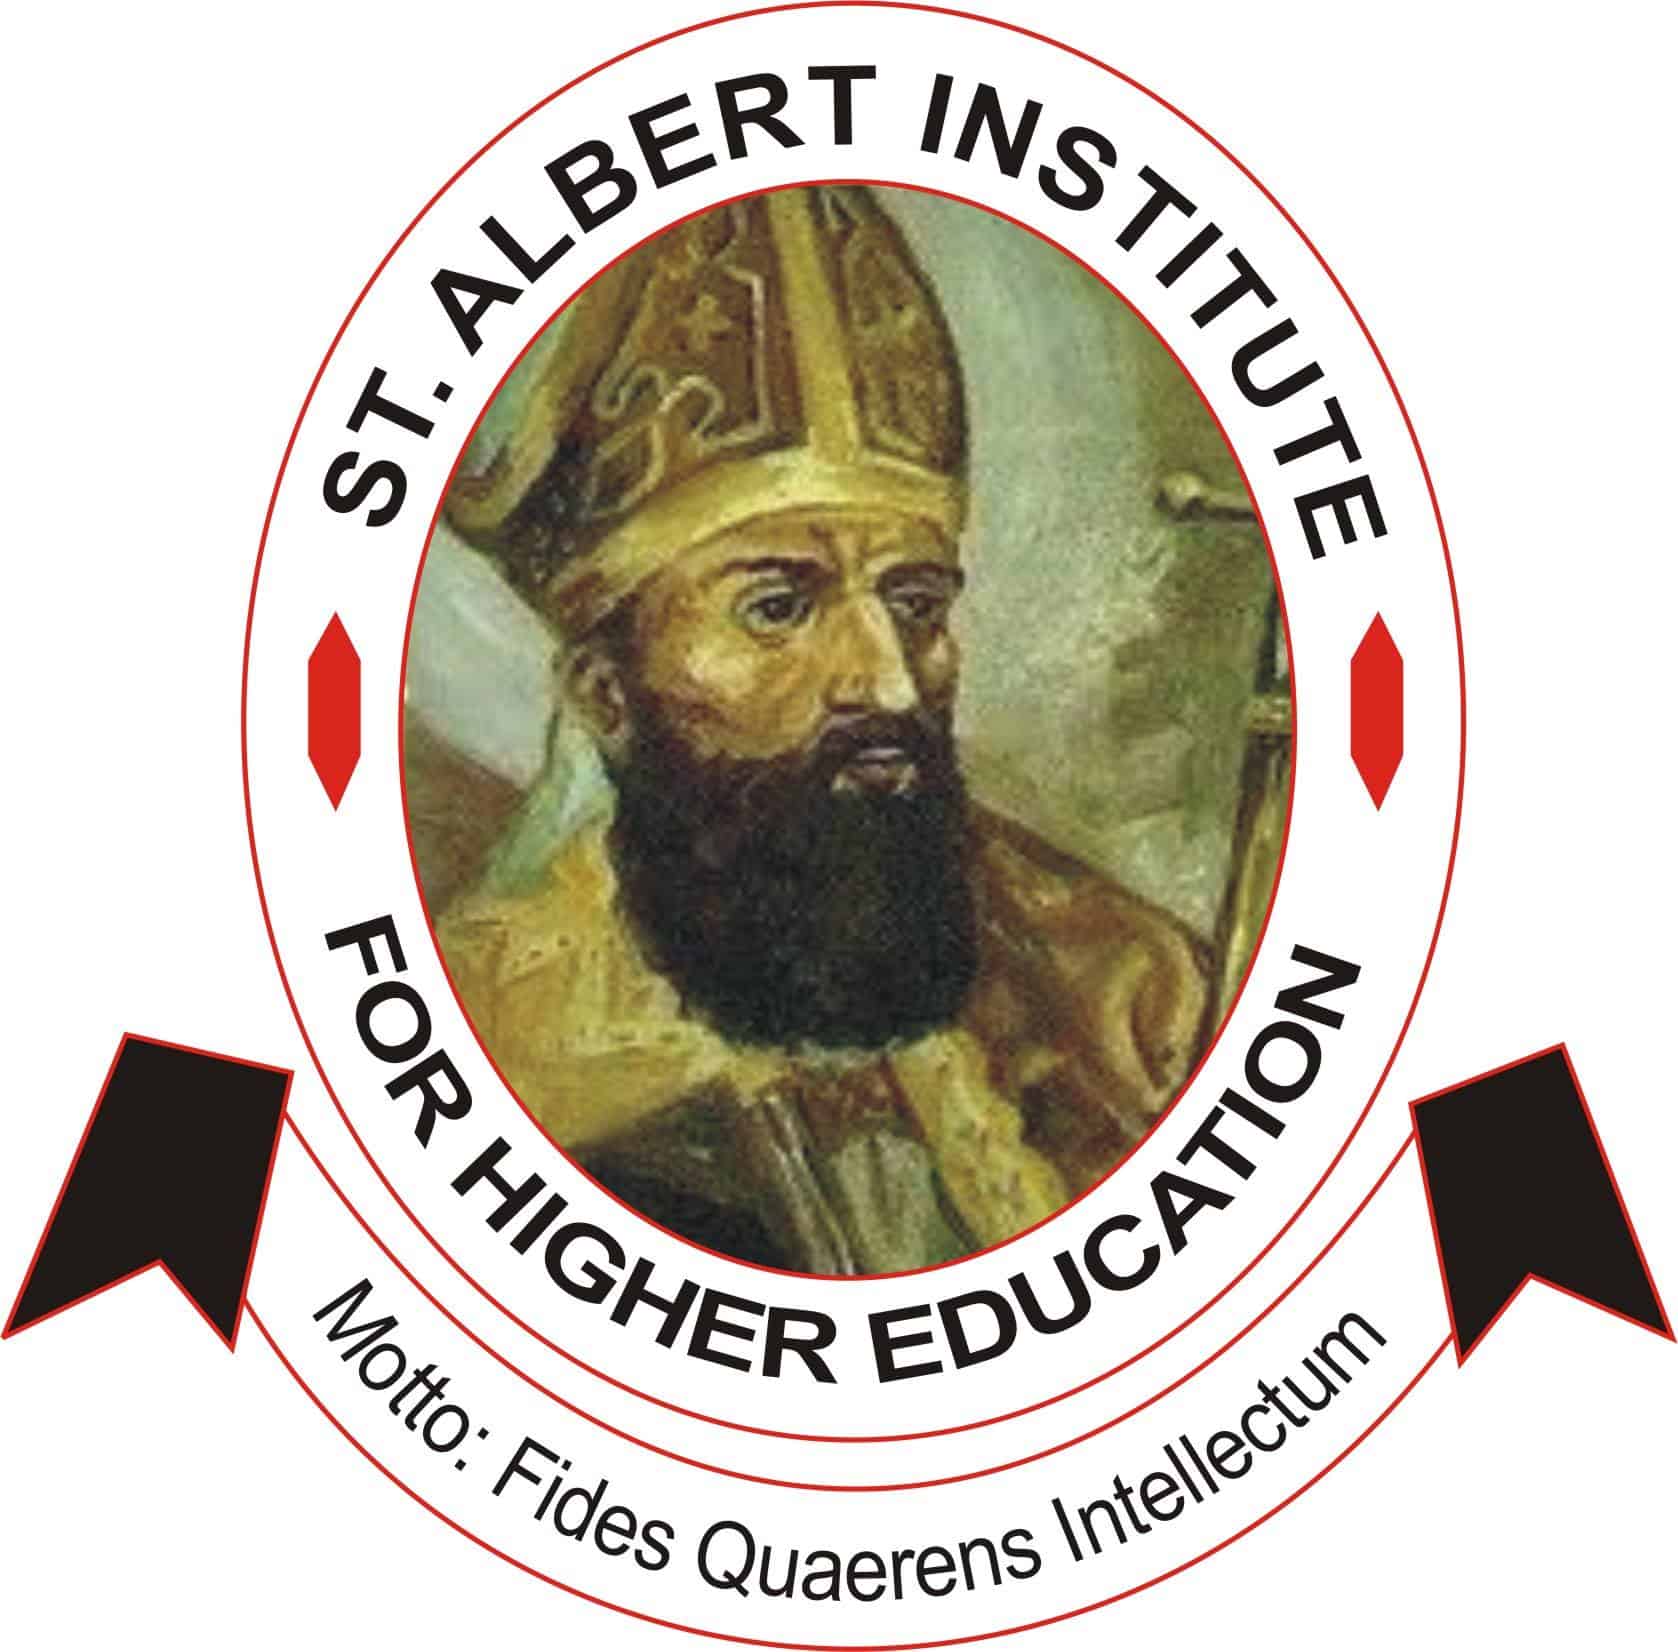 Admission List for St. Albert Institute (associated with UNIJOS)